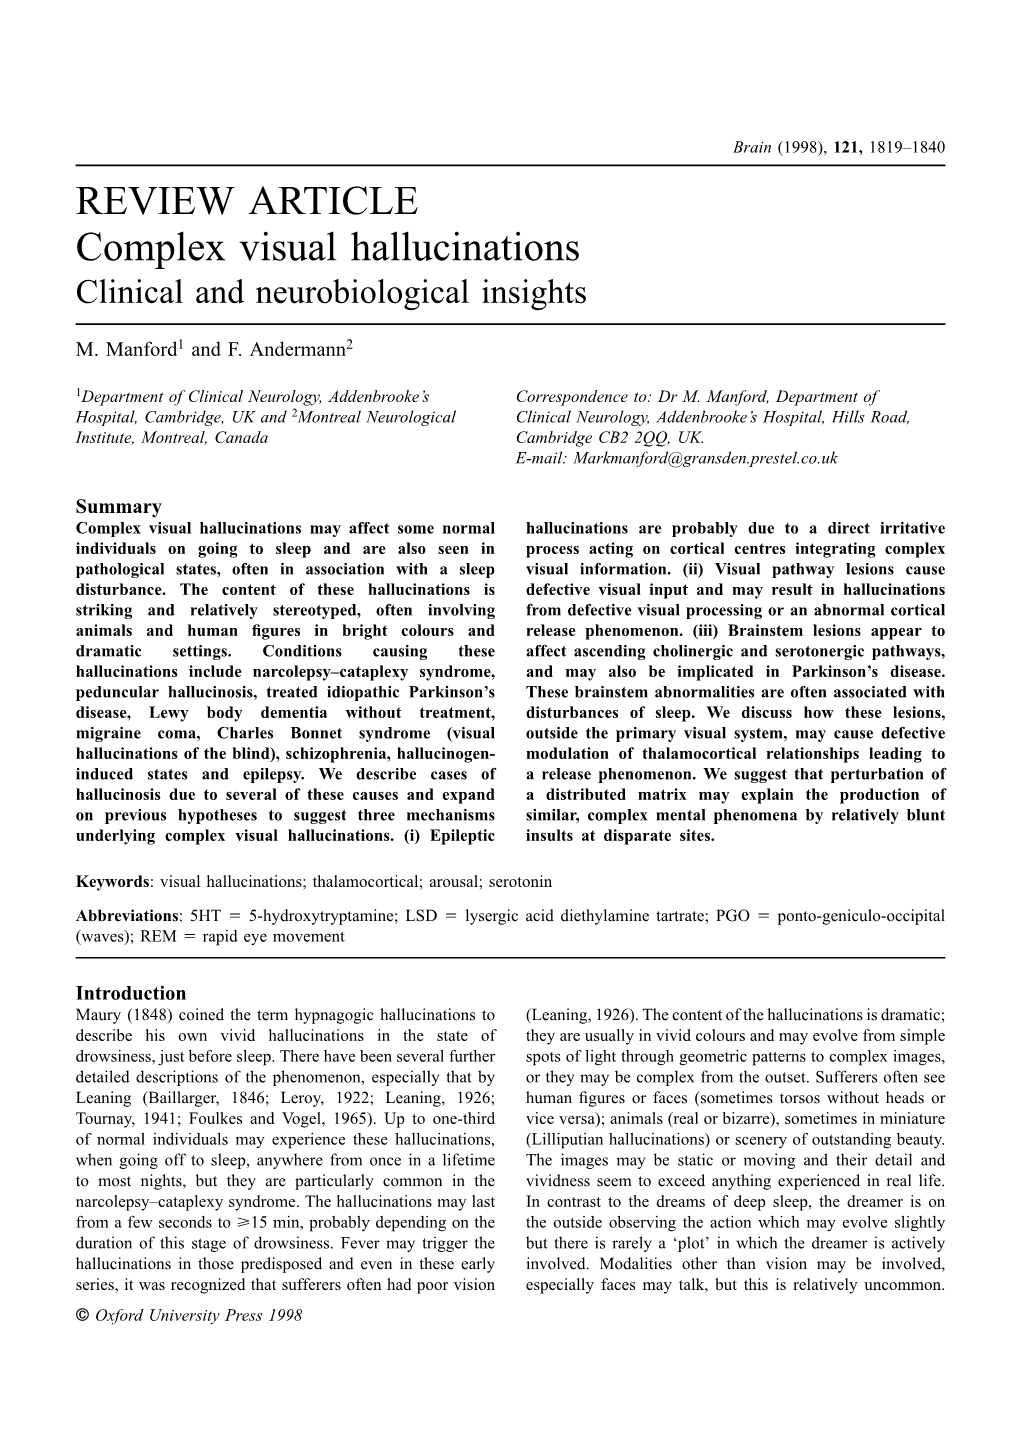 REVIEW ARTICLE Complex Visual Hallucinations Clinical and Neurobiological Insights